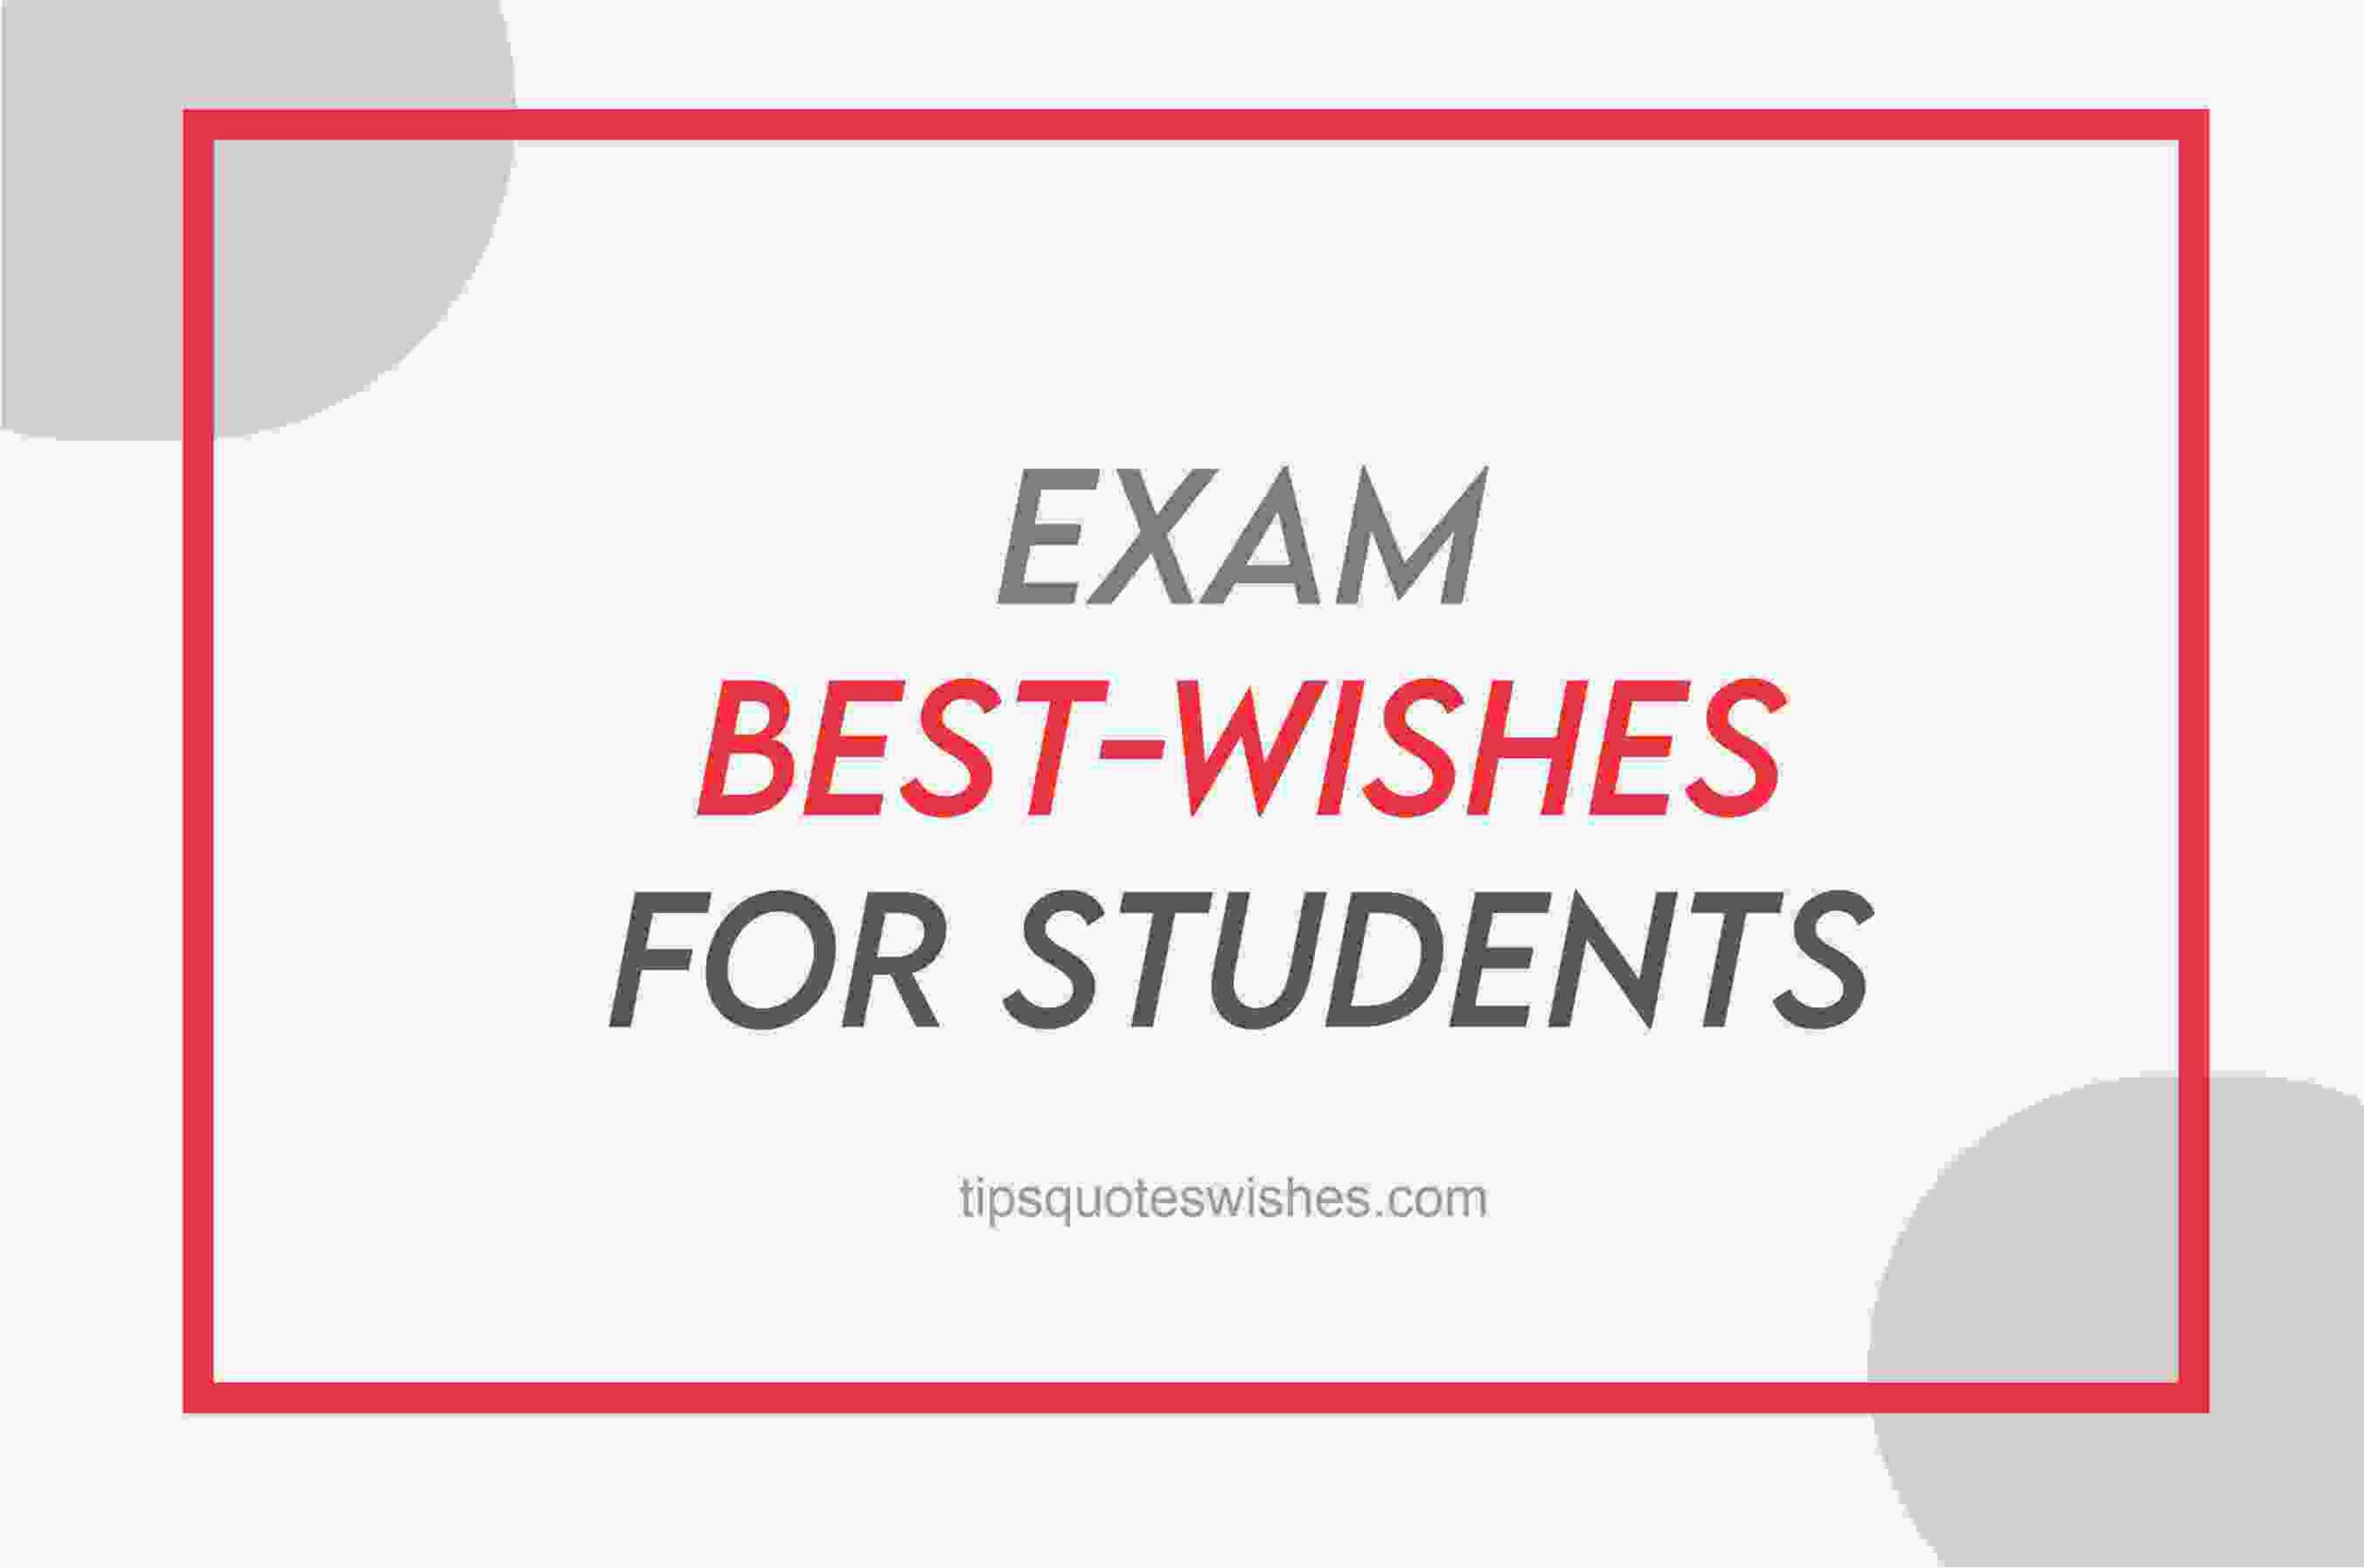 Best Wishes For Exam For Students